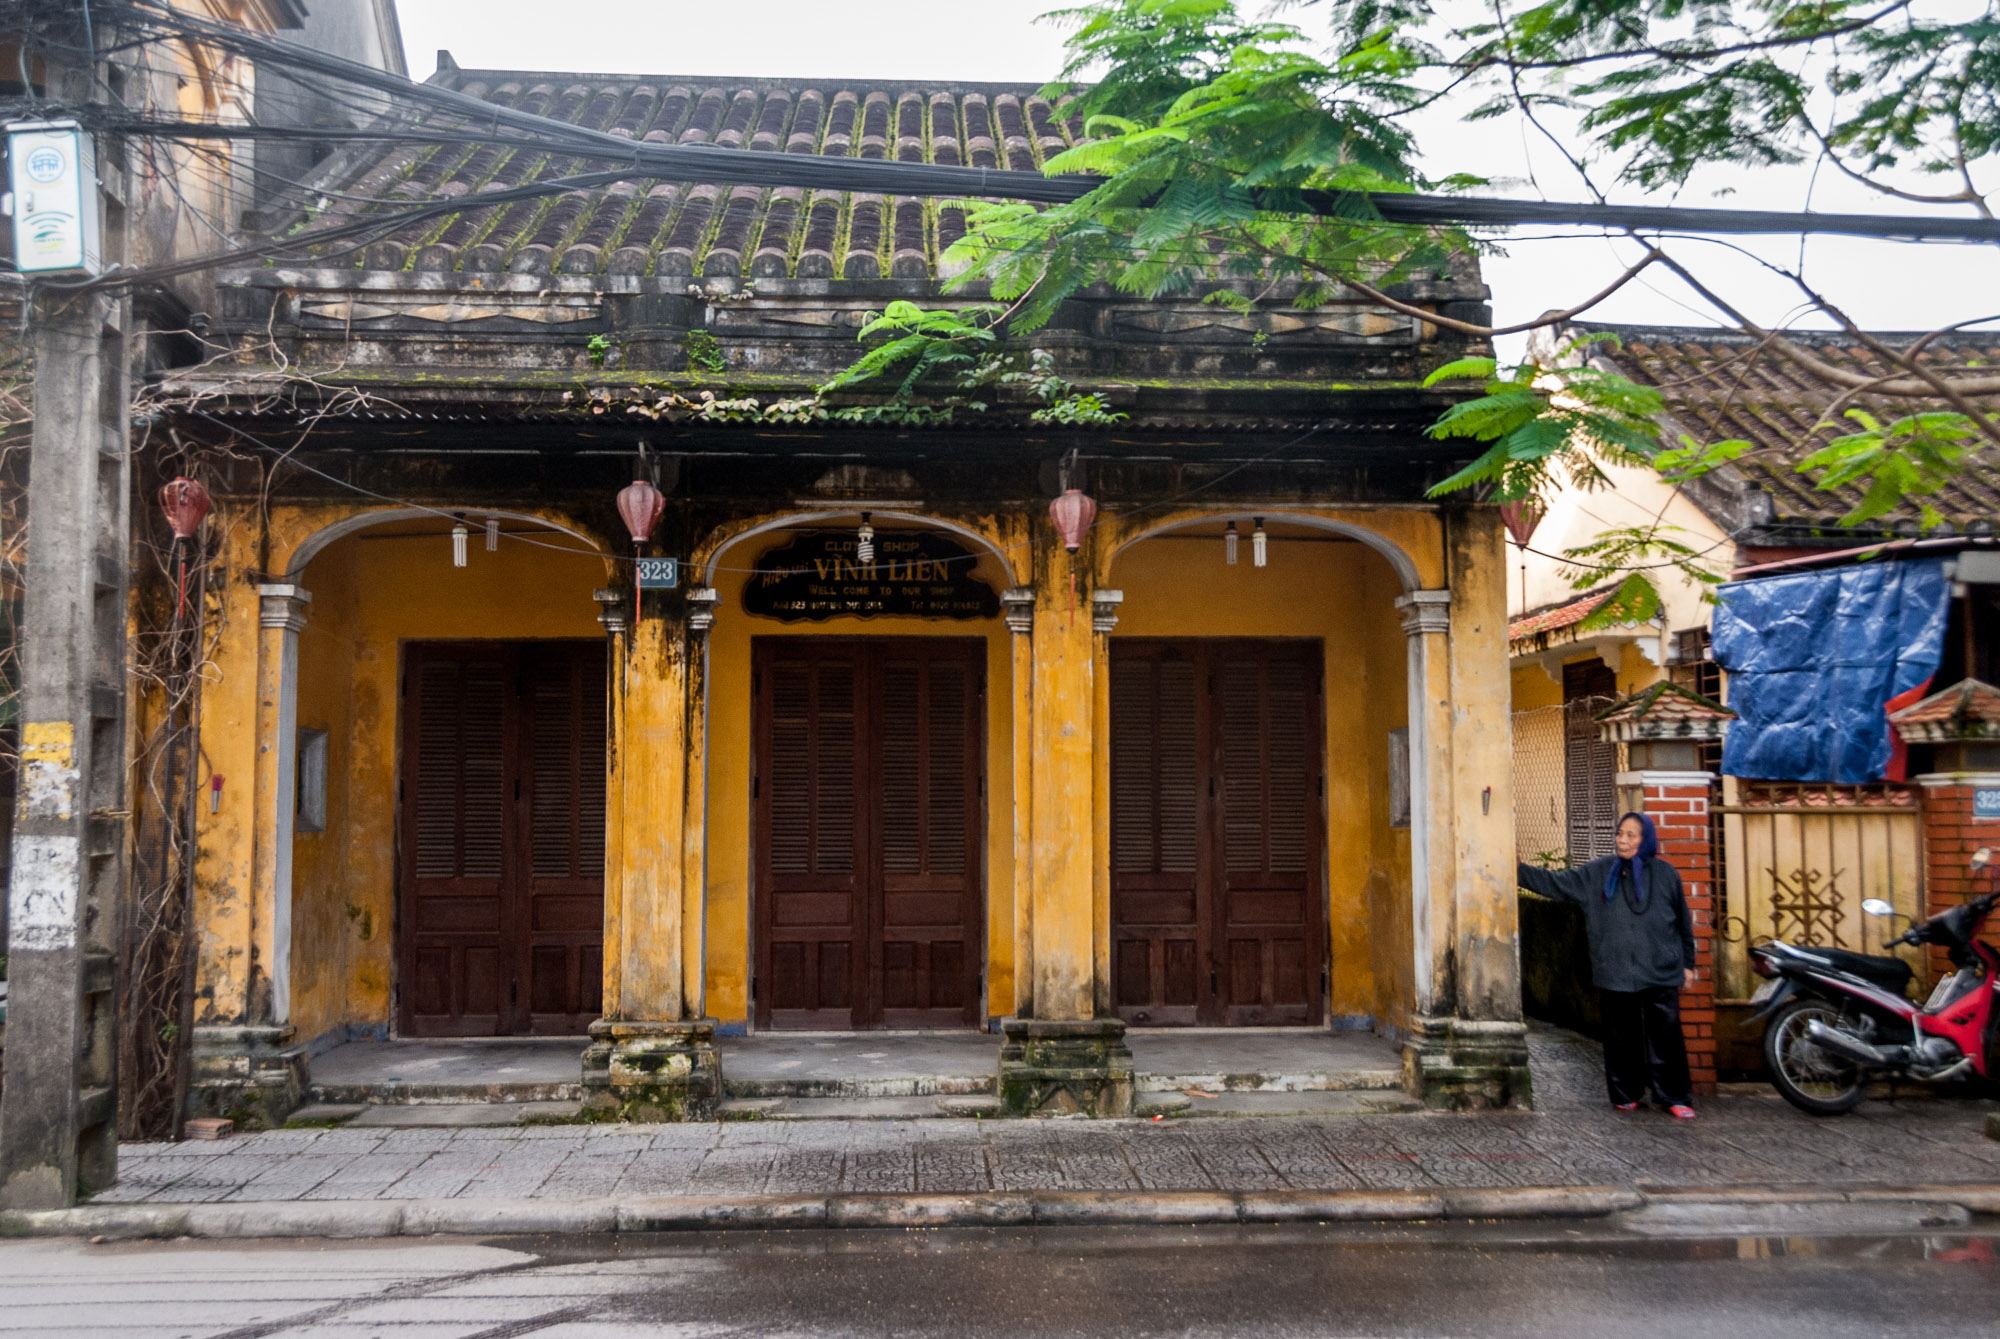 Historic building in Hoi An